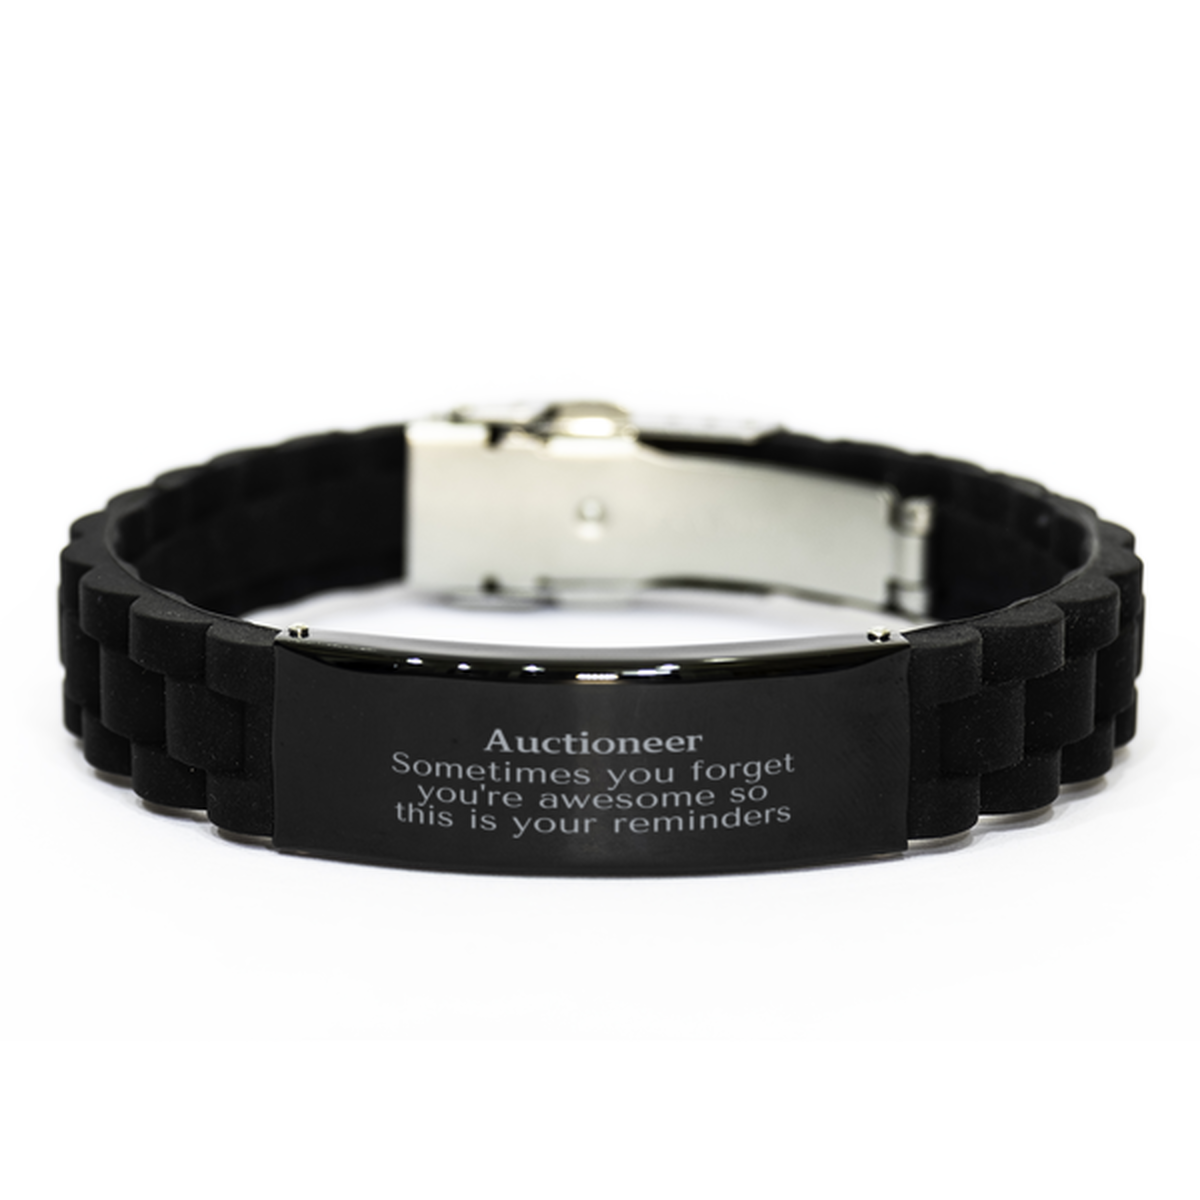 Sentimental Auctioneer Black Glidelock Clasp Bracelet, Auctioneer Sometimes you forget you're awesome so this is your reminders, Graduation Christmas Birthday Gifts for Auctioneer, Men, Women, Coworkers